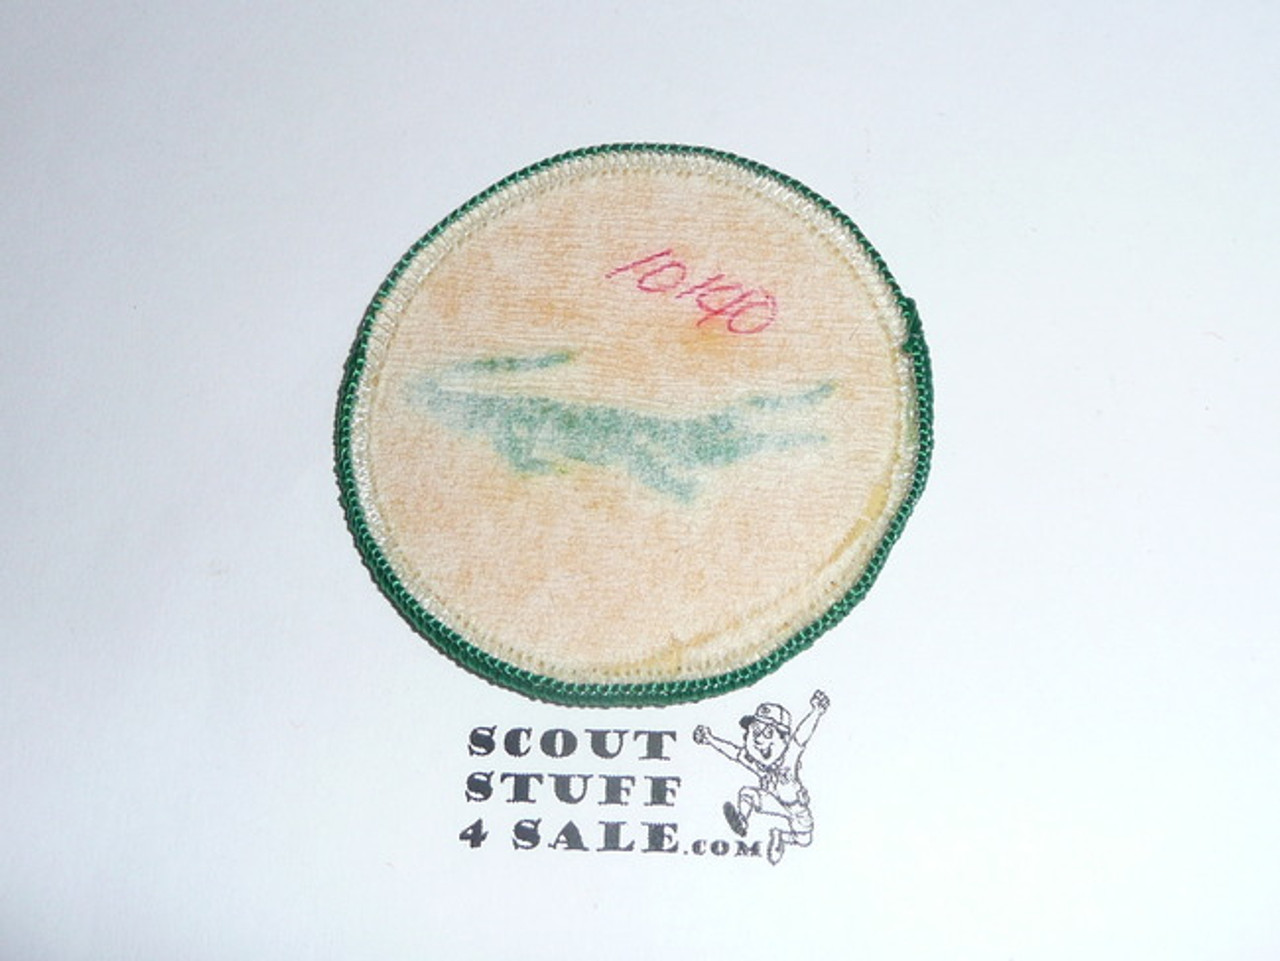 Alligator Patrol Medallion, yellow Twill with paper back, 1972-1989